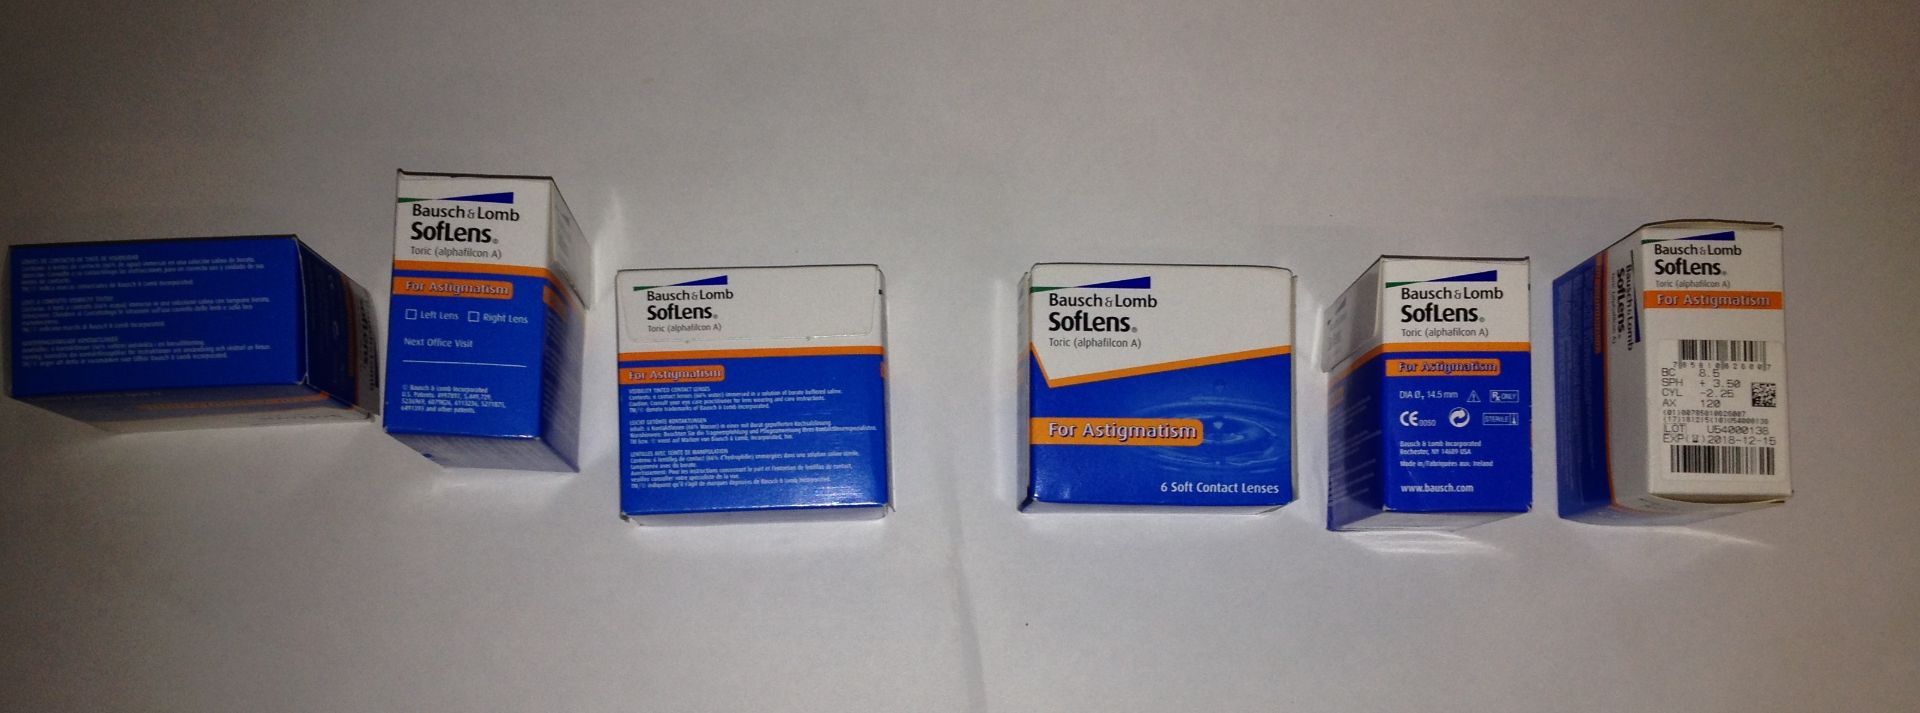 48 x 6 x Bausch & Lomb Softlens Toric (alphafilicon A) For Astigmatism contact lenses - Image 2 of 2